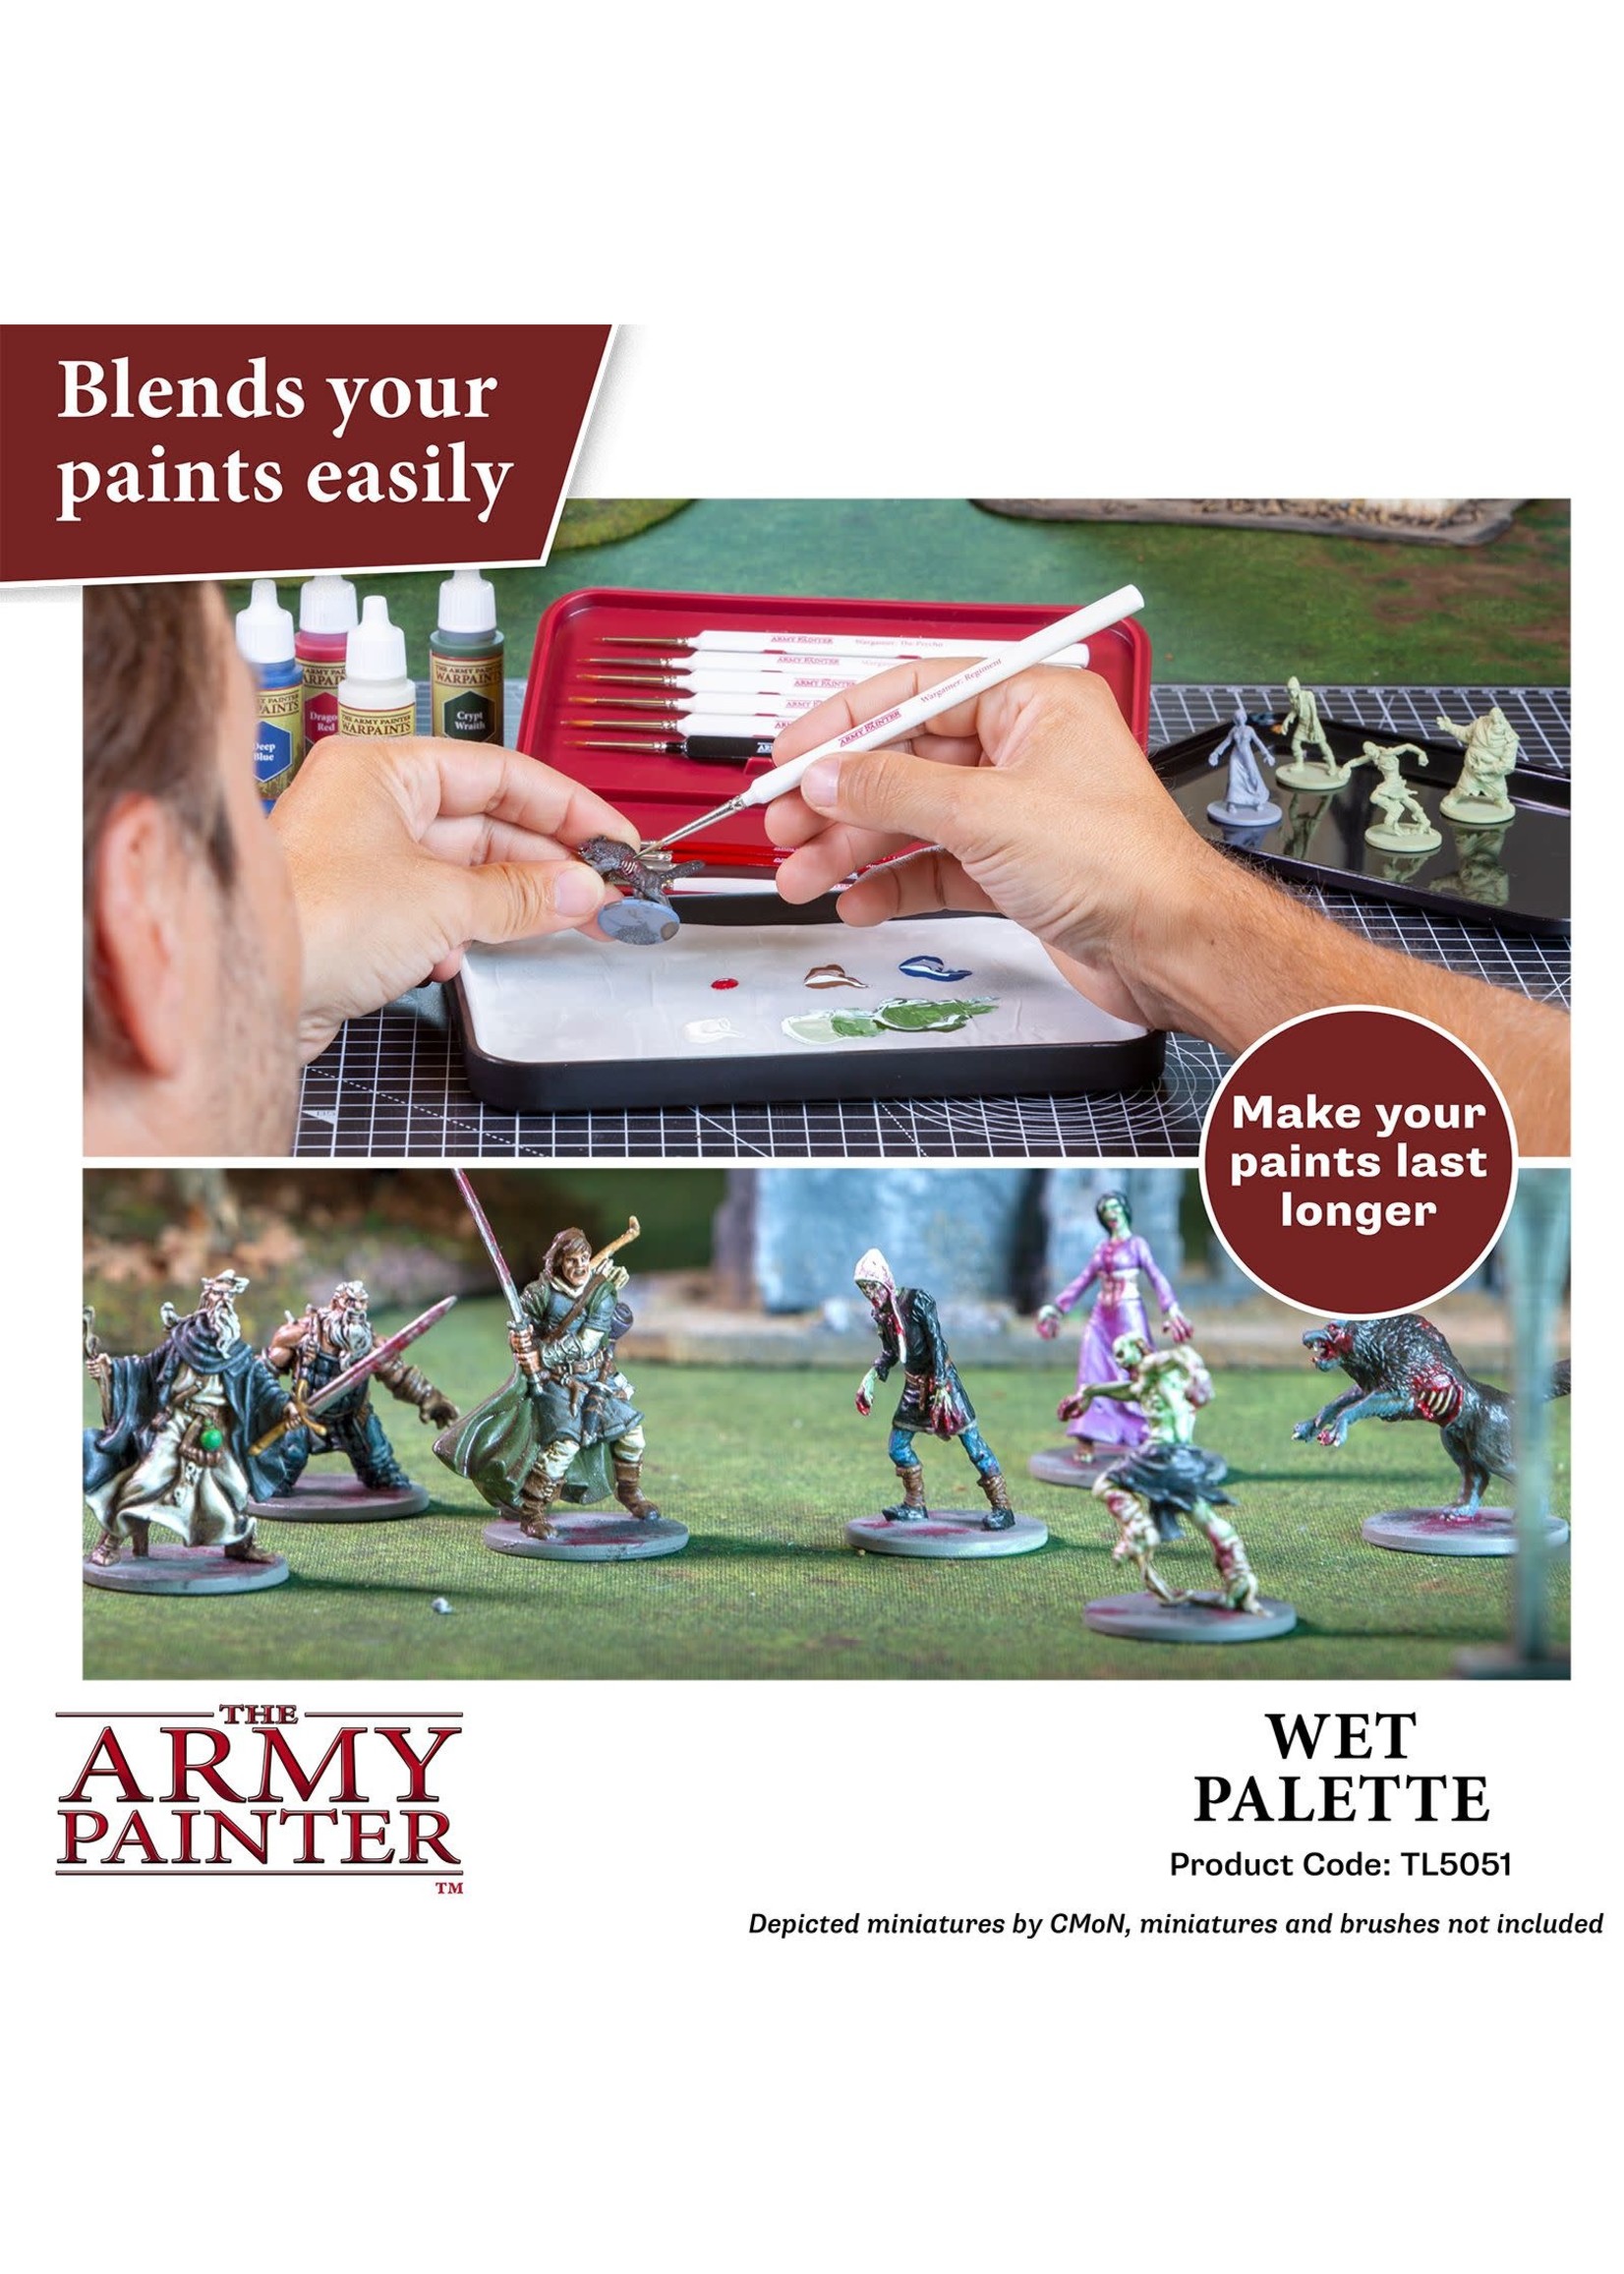 The Army Painter Wet Palette - The Army Painter